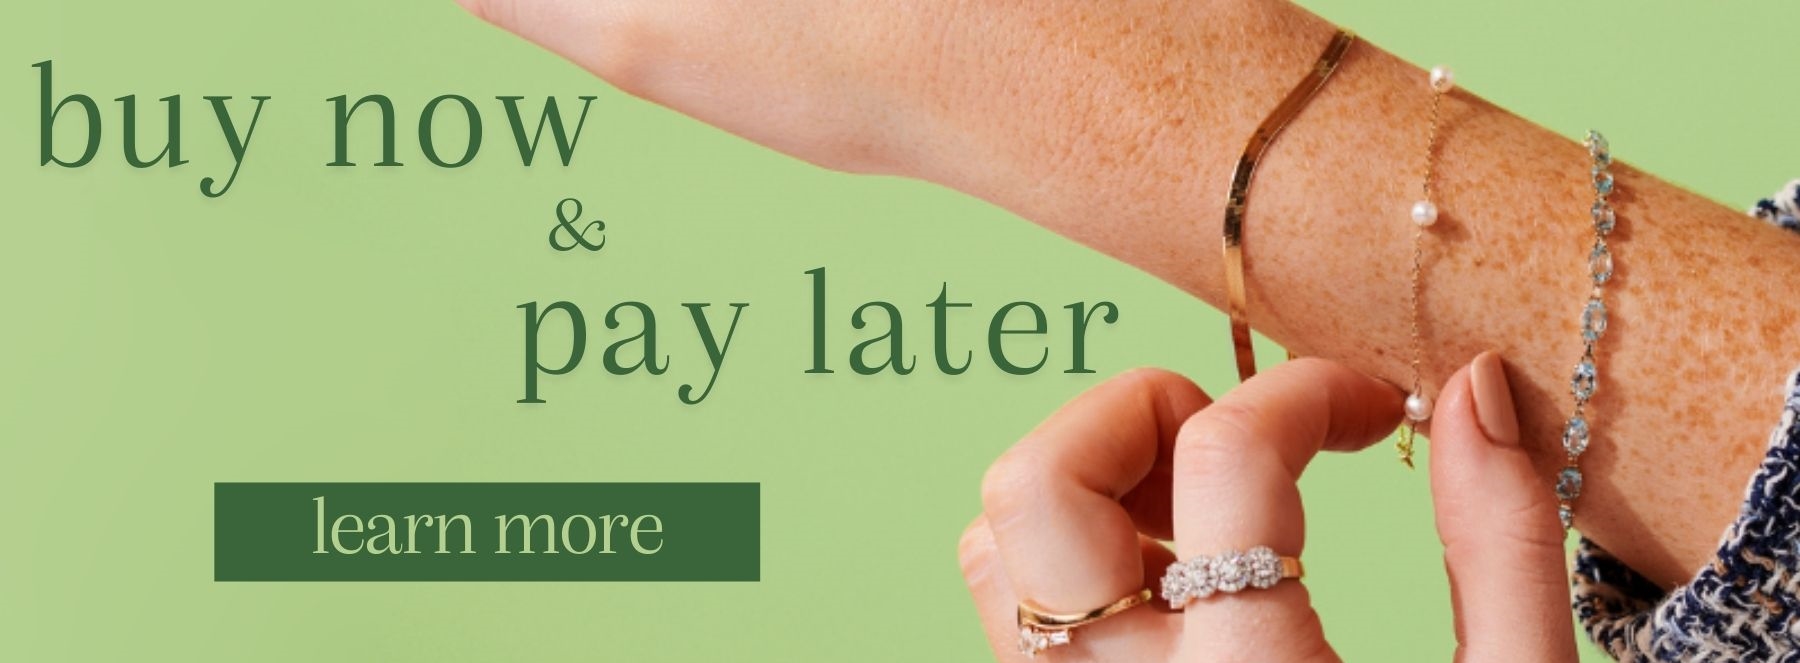 Buy Now & Pay Later with LendFirm Financing